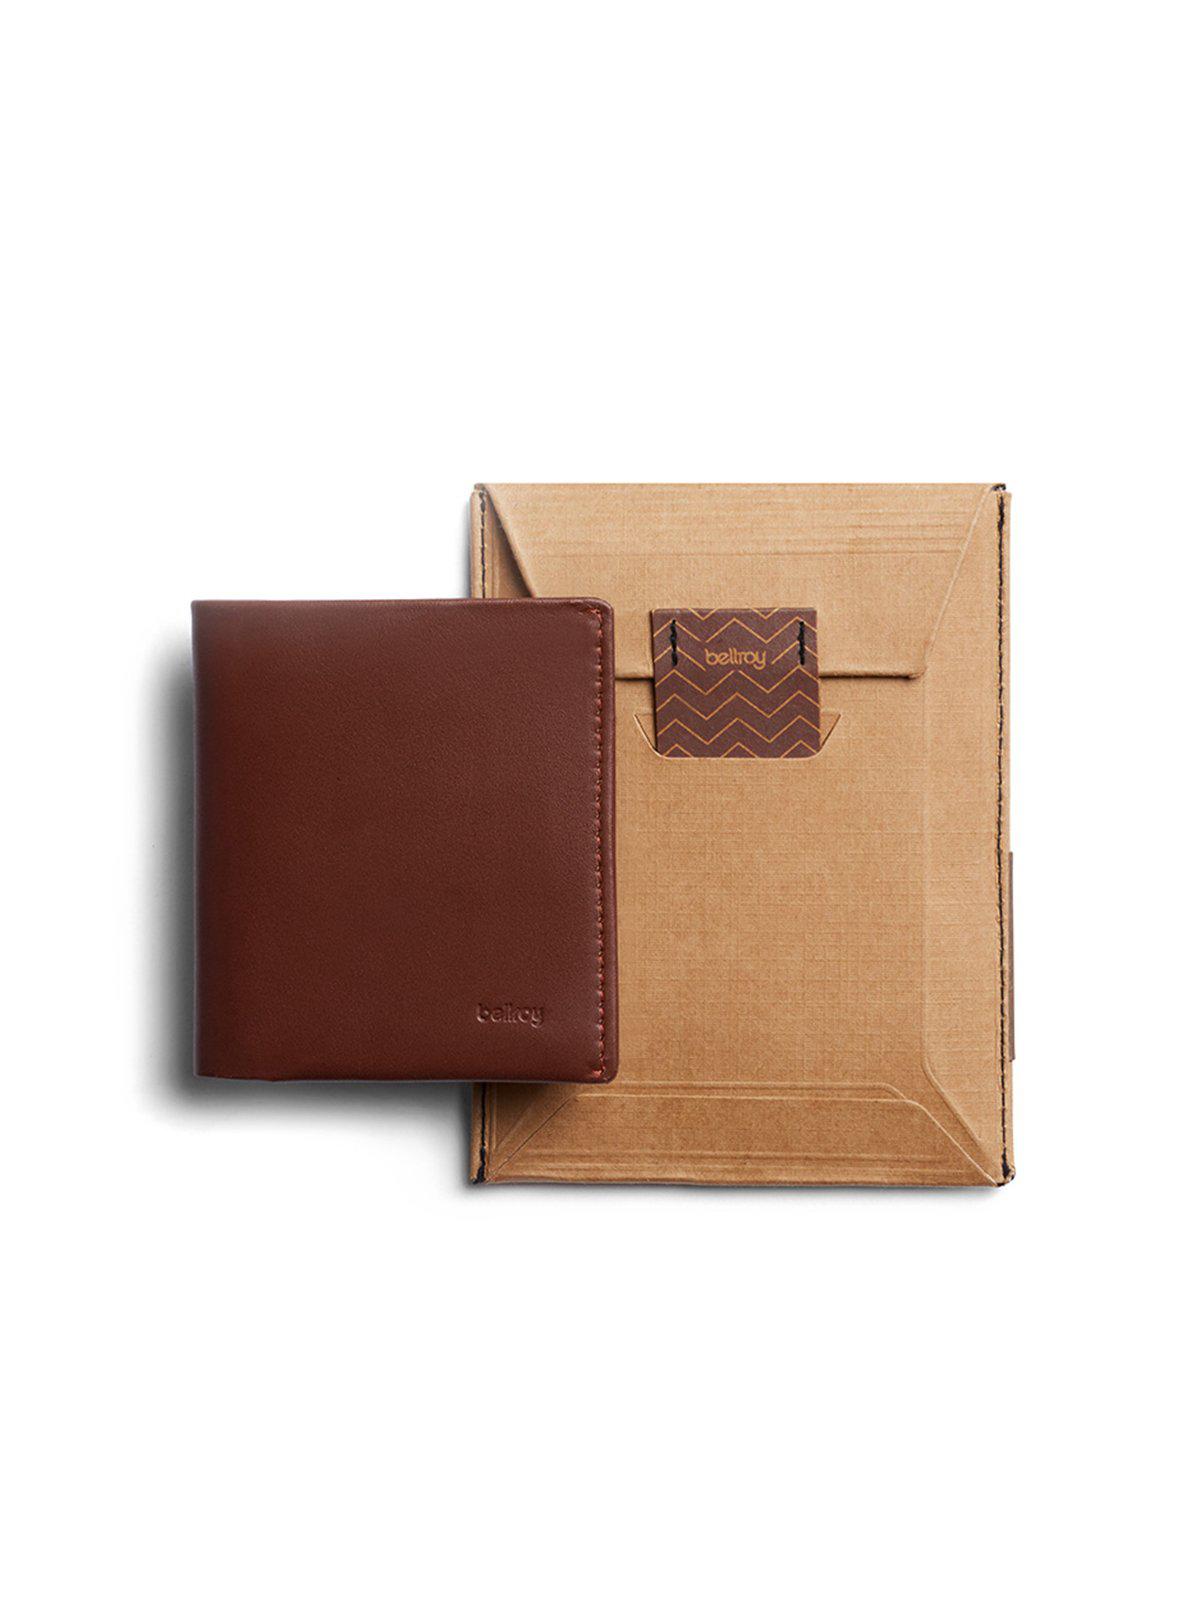 Bellroy Note Sleeve Wallet Cocoa RFID - MORE by Morello Indonesia